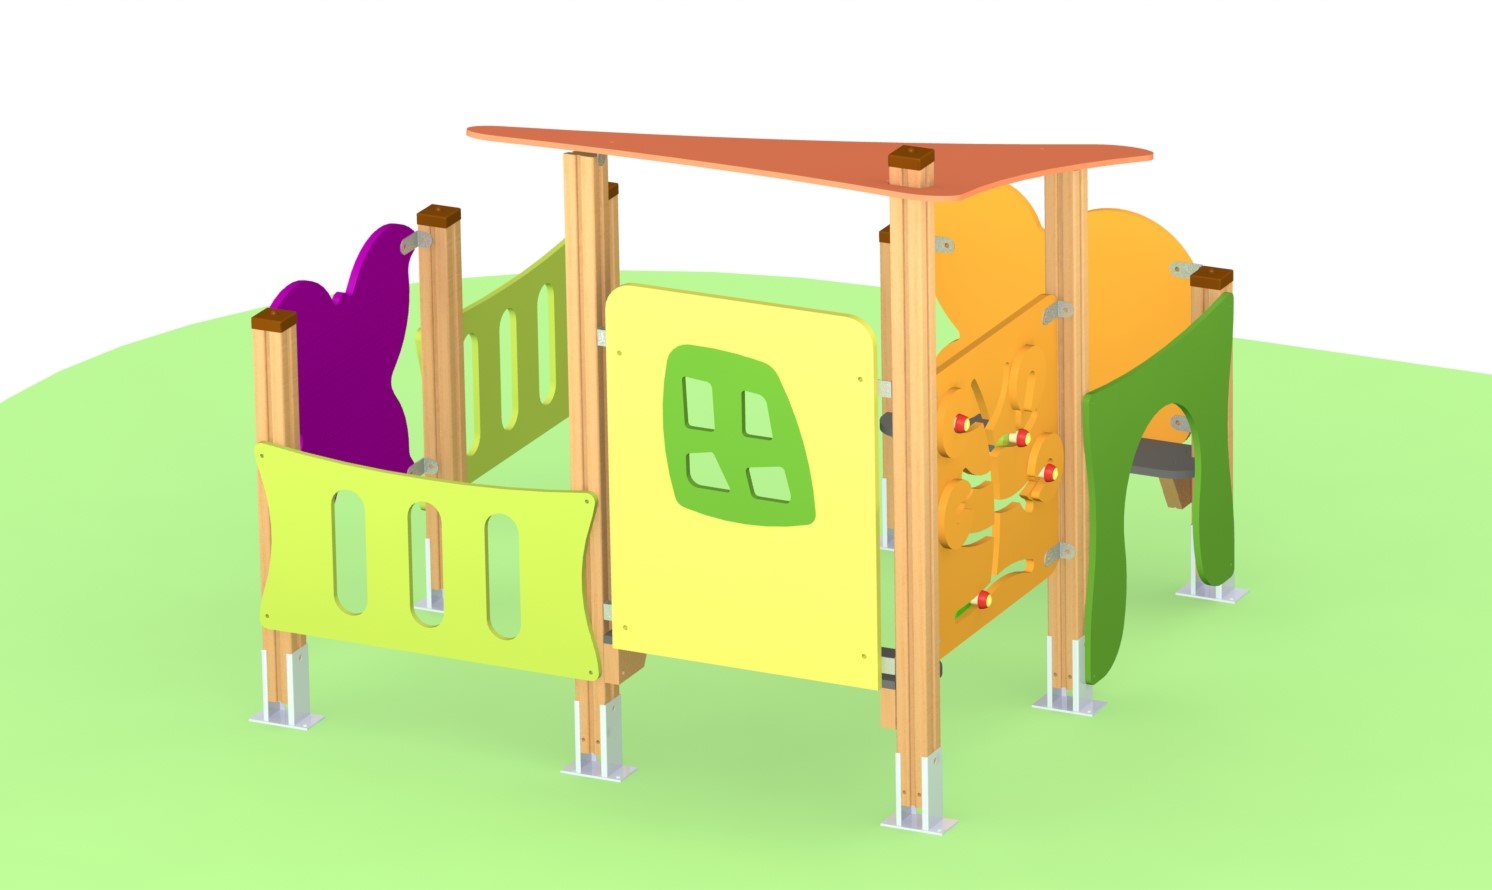 Children’s play house with benches and entertaining games, Б31 model